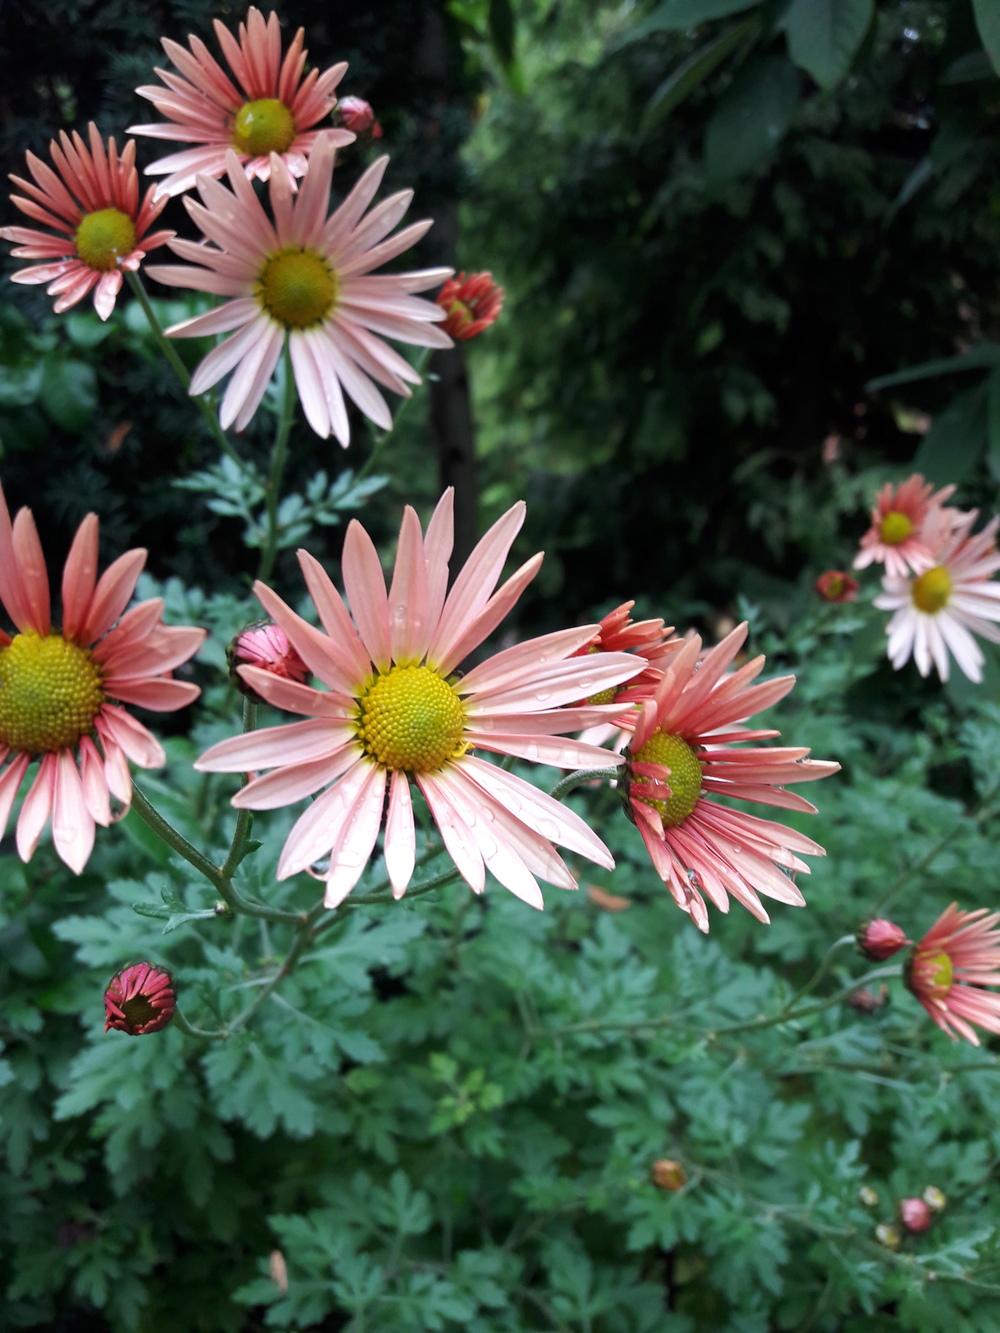 Photo of Chrysanthemum uploaded by deadnuts11